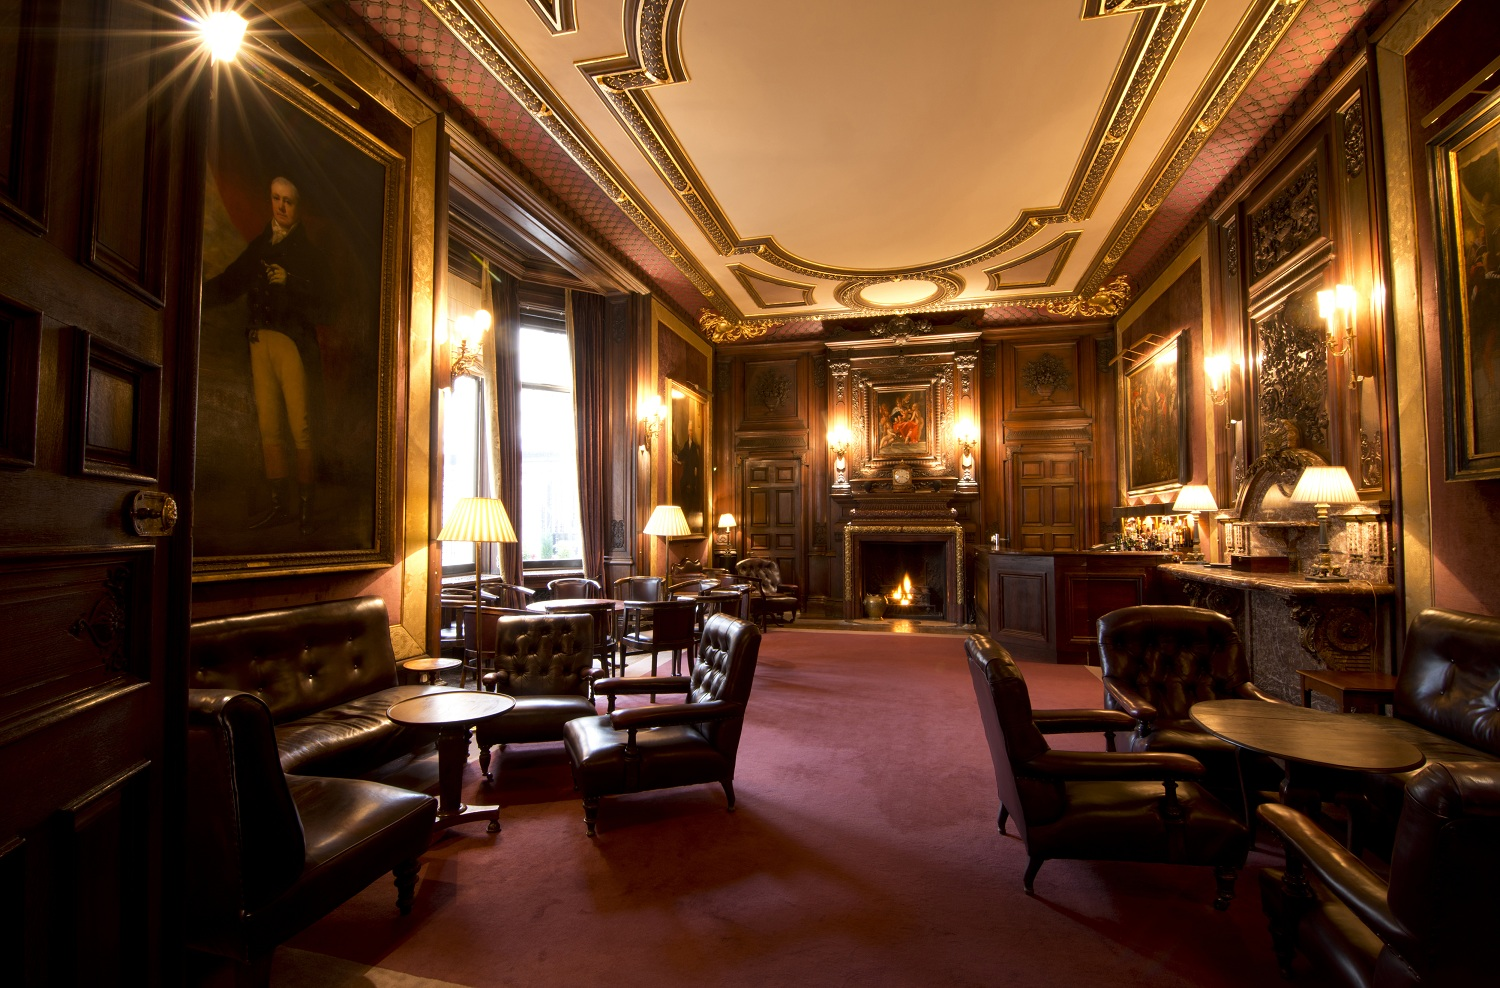 The Savile Club bar: a ceiling with ornate moldings and various places to lounge among paintings and warm lights.